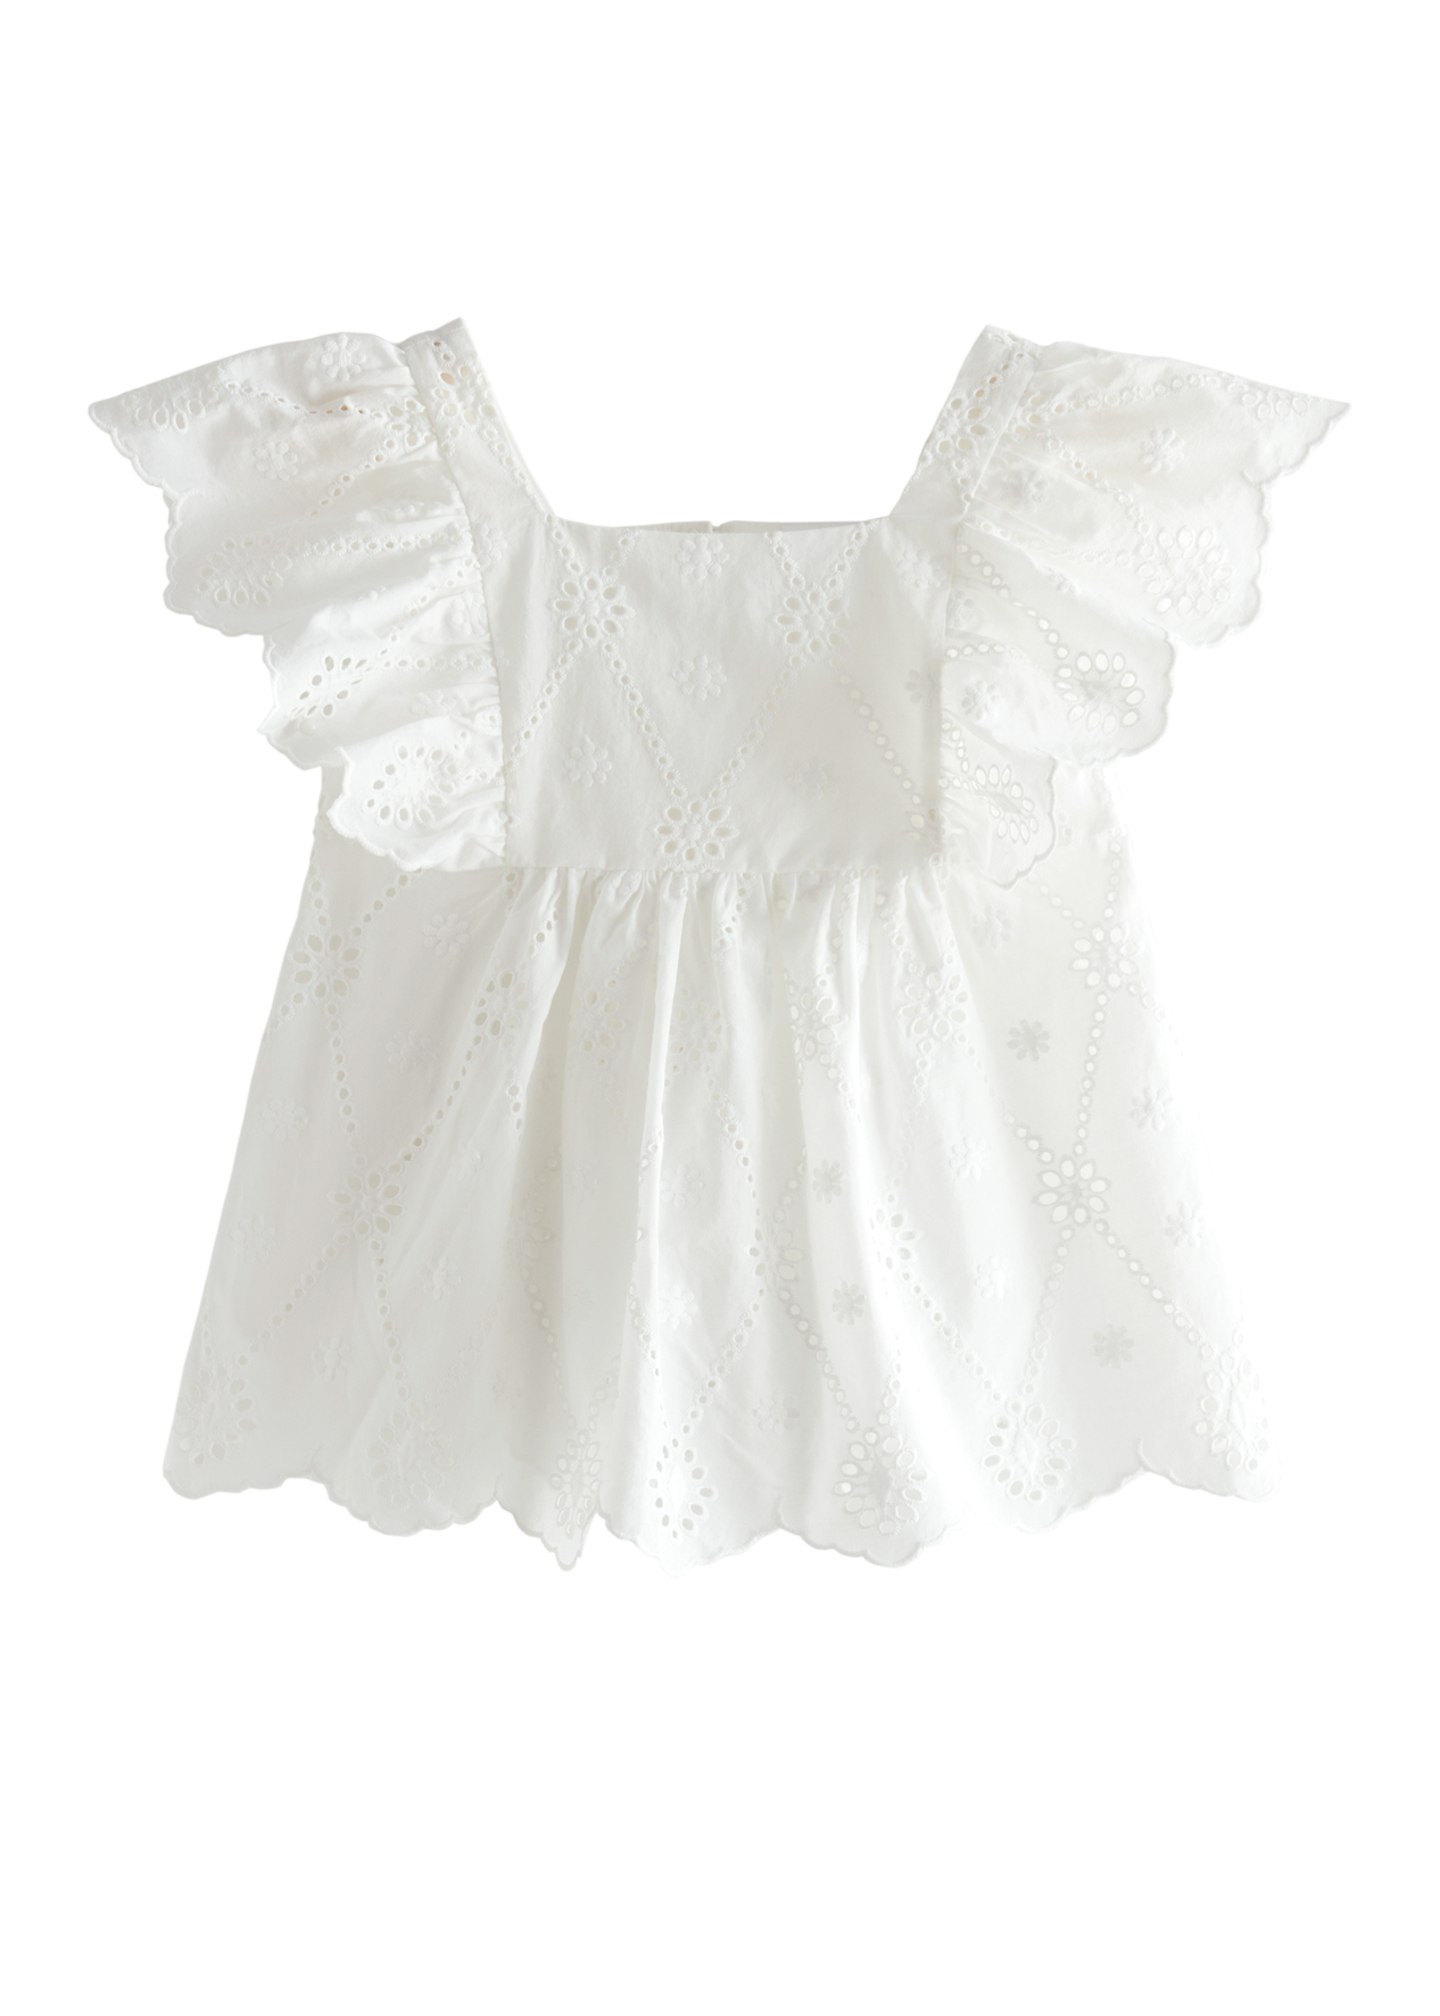 & Other Stories, Kids Ruffle-Neck Top, £35